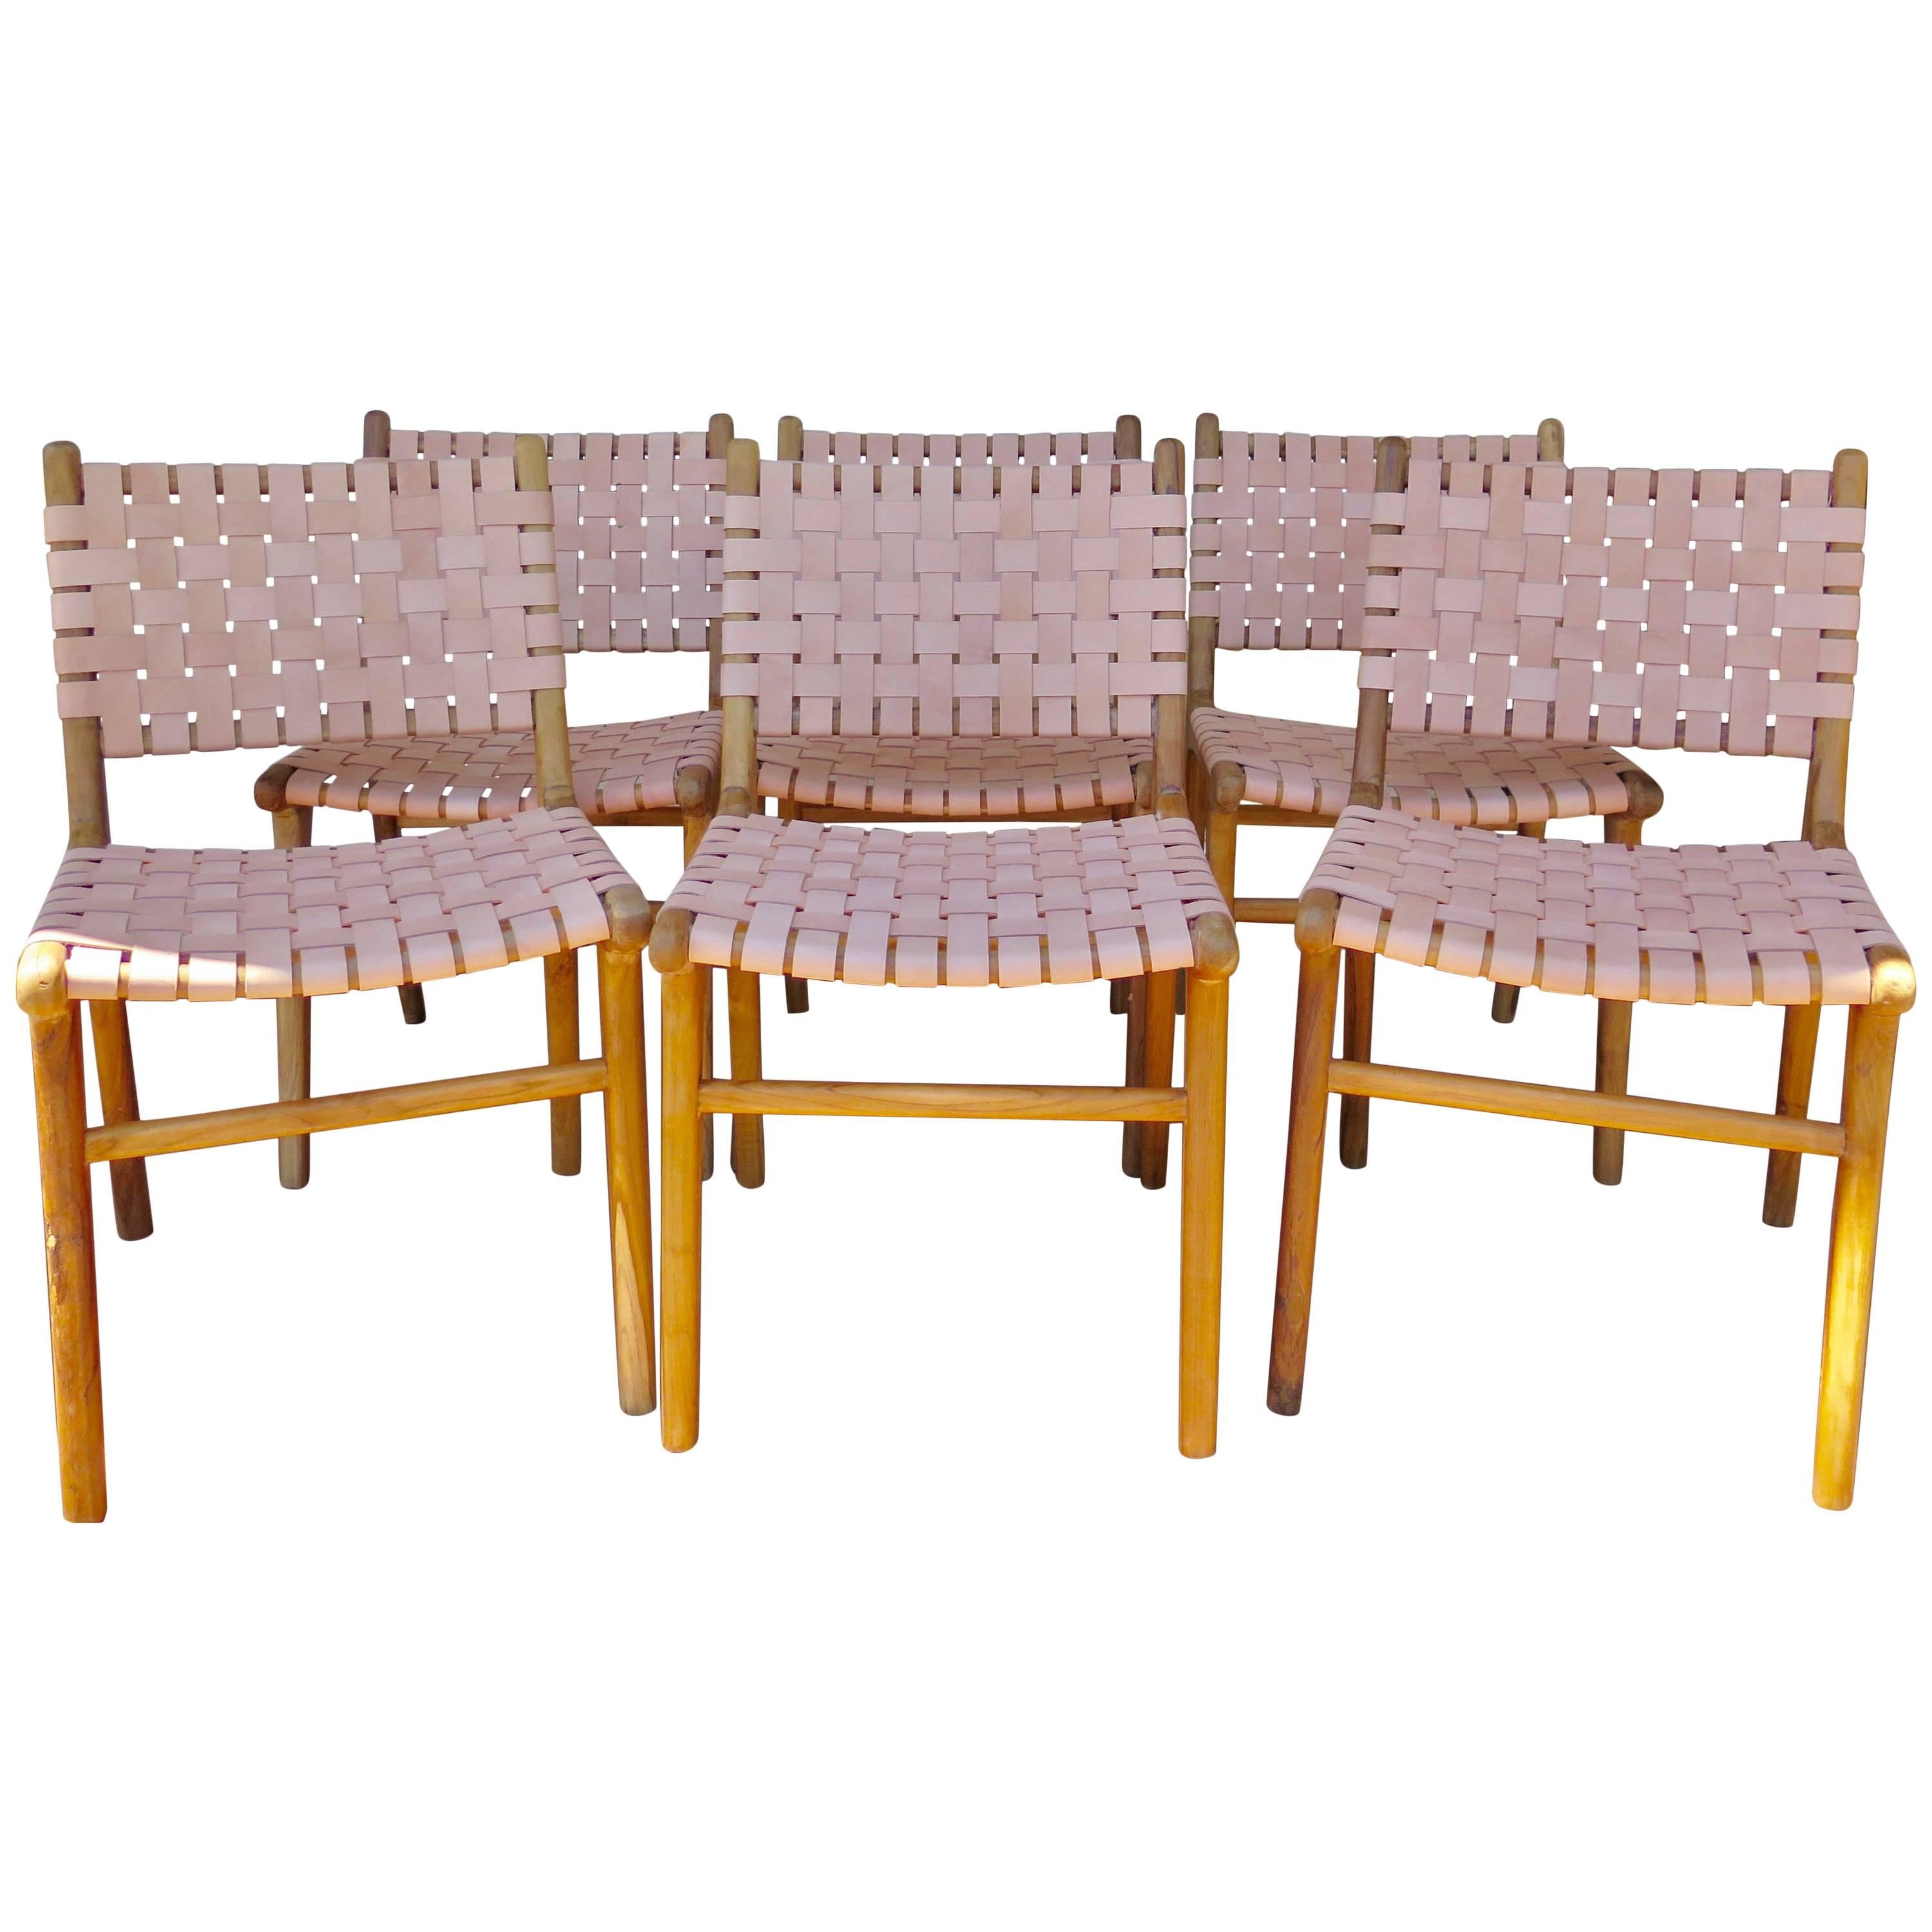 Six "Flora" Modern Dining Chairs with Leather Strapping Haskell Studio 